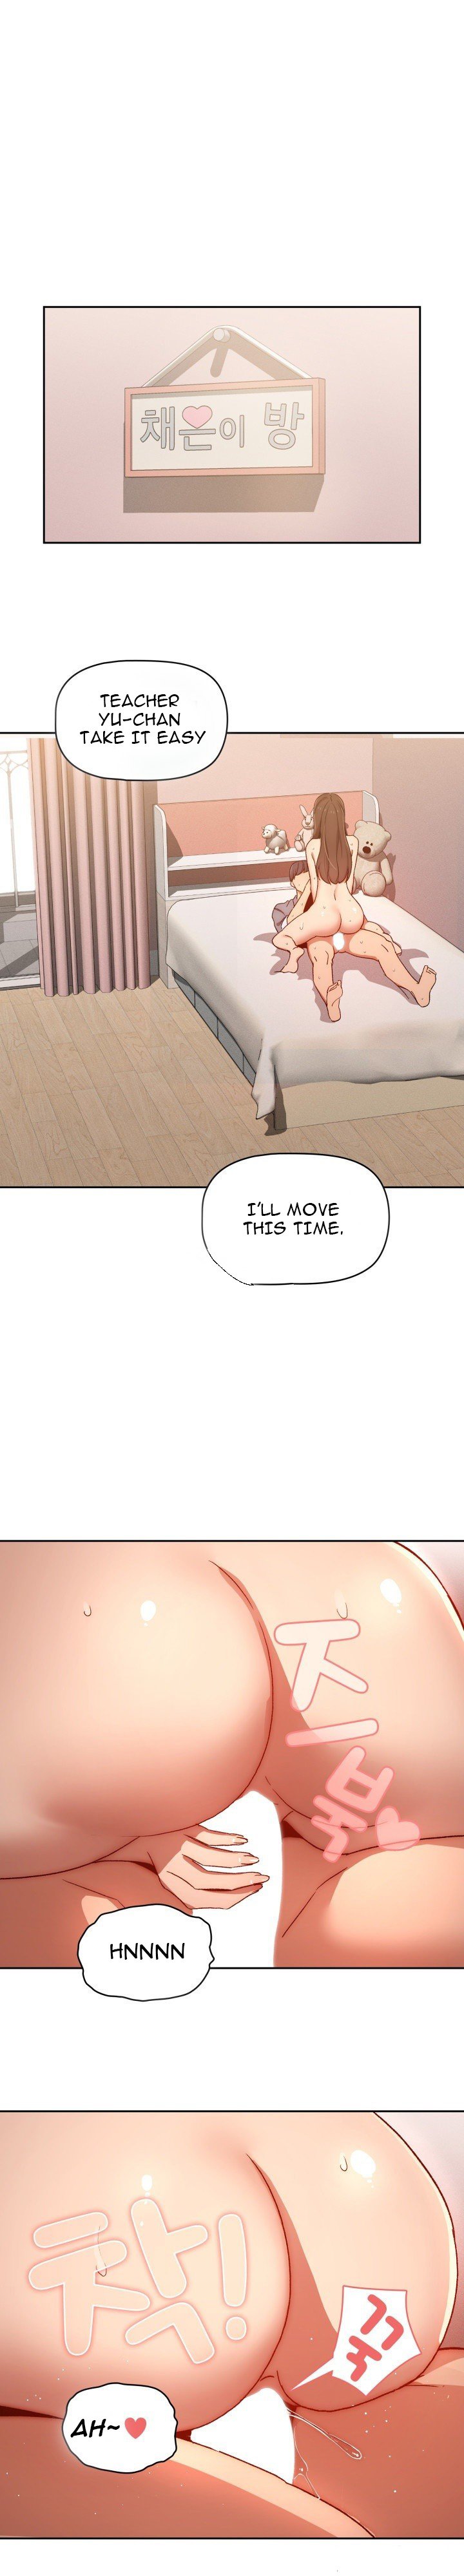 private-tutoring-in-these-trying-times-chap-31-0